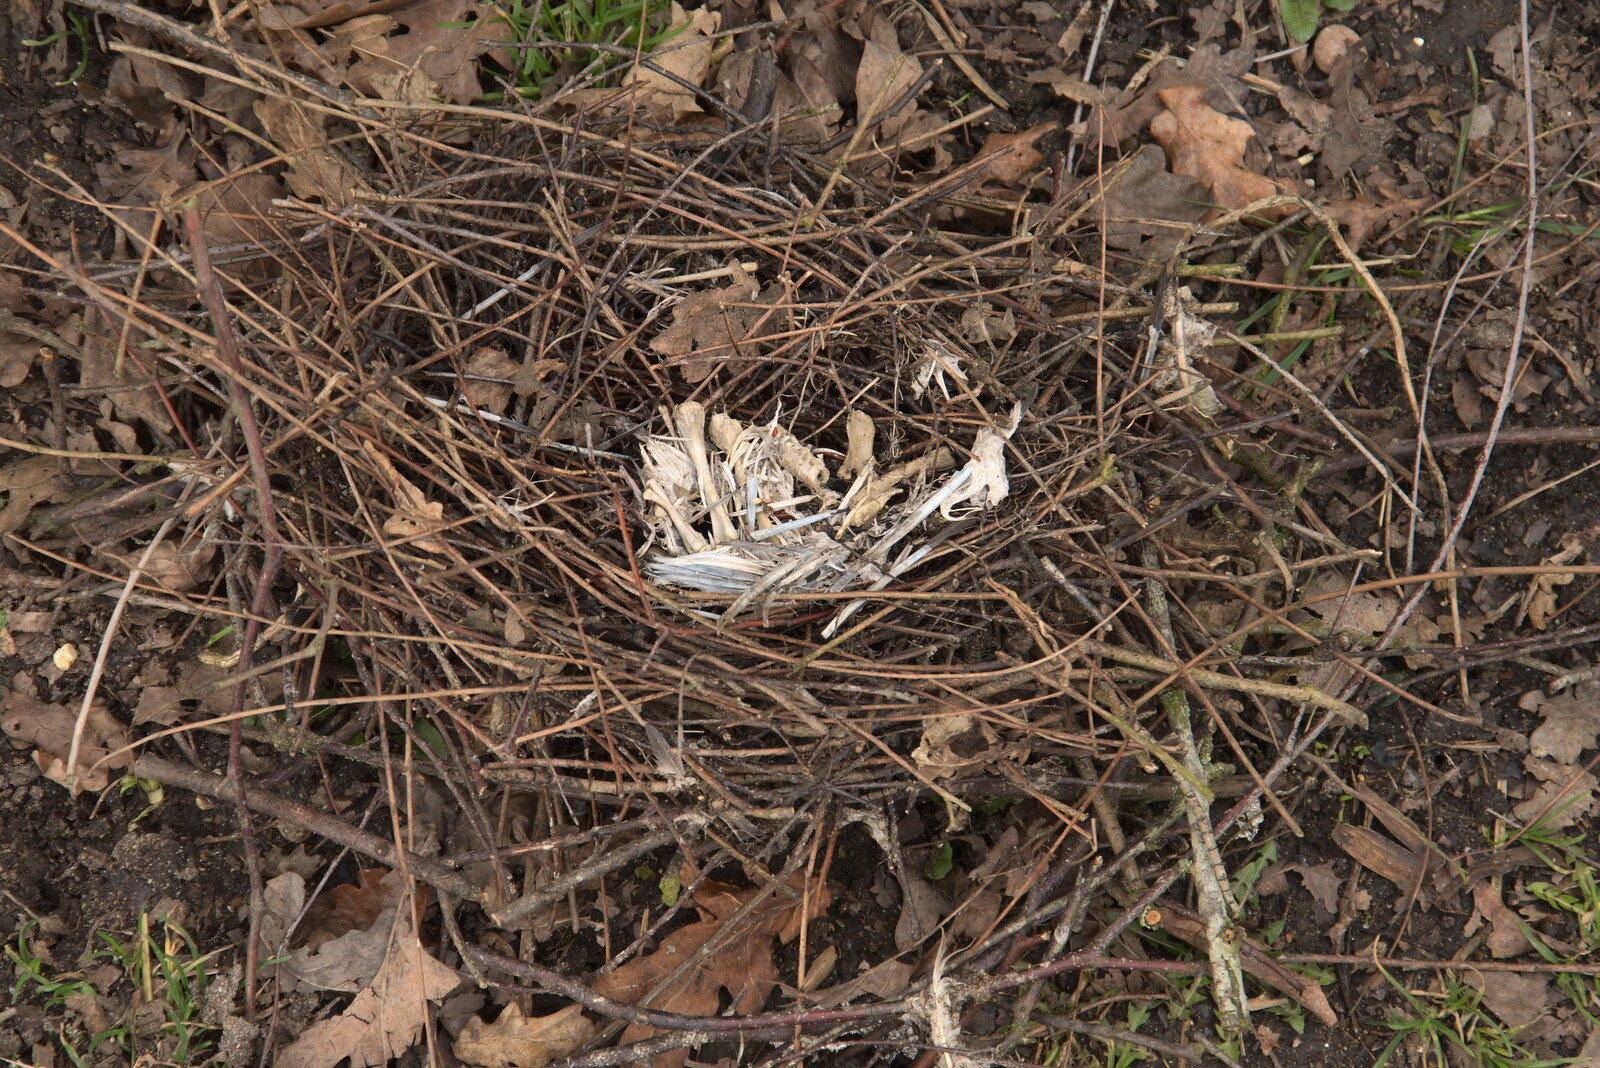 There's a bleached bird skeleton in a fallen nest from Another Walk on Eye Airfield, Eye, Suffolk - 14th March 2021